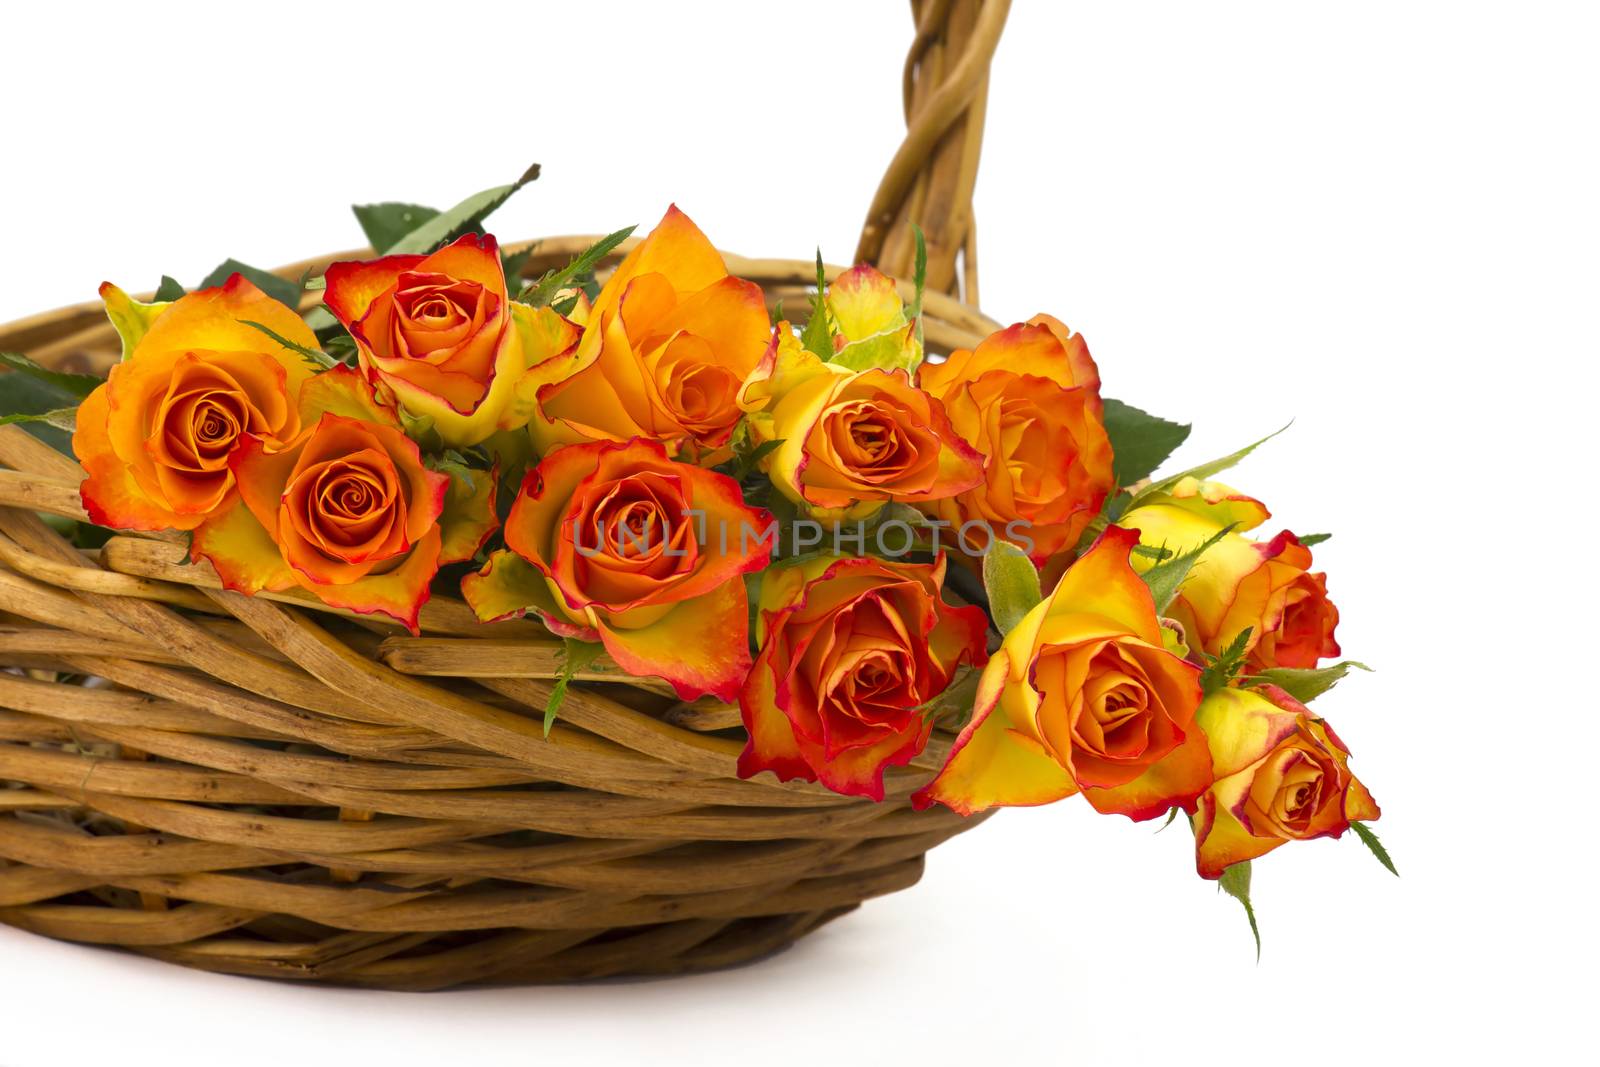 roses in a basket by miradrozdowski